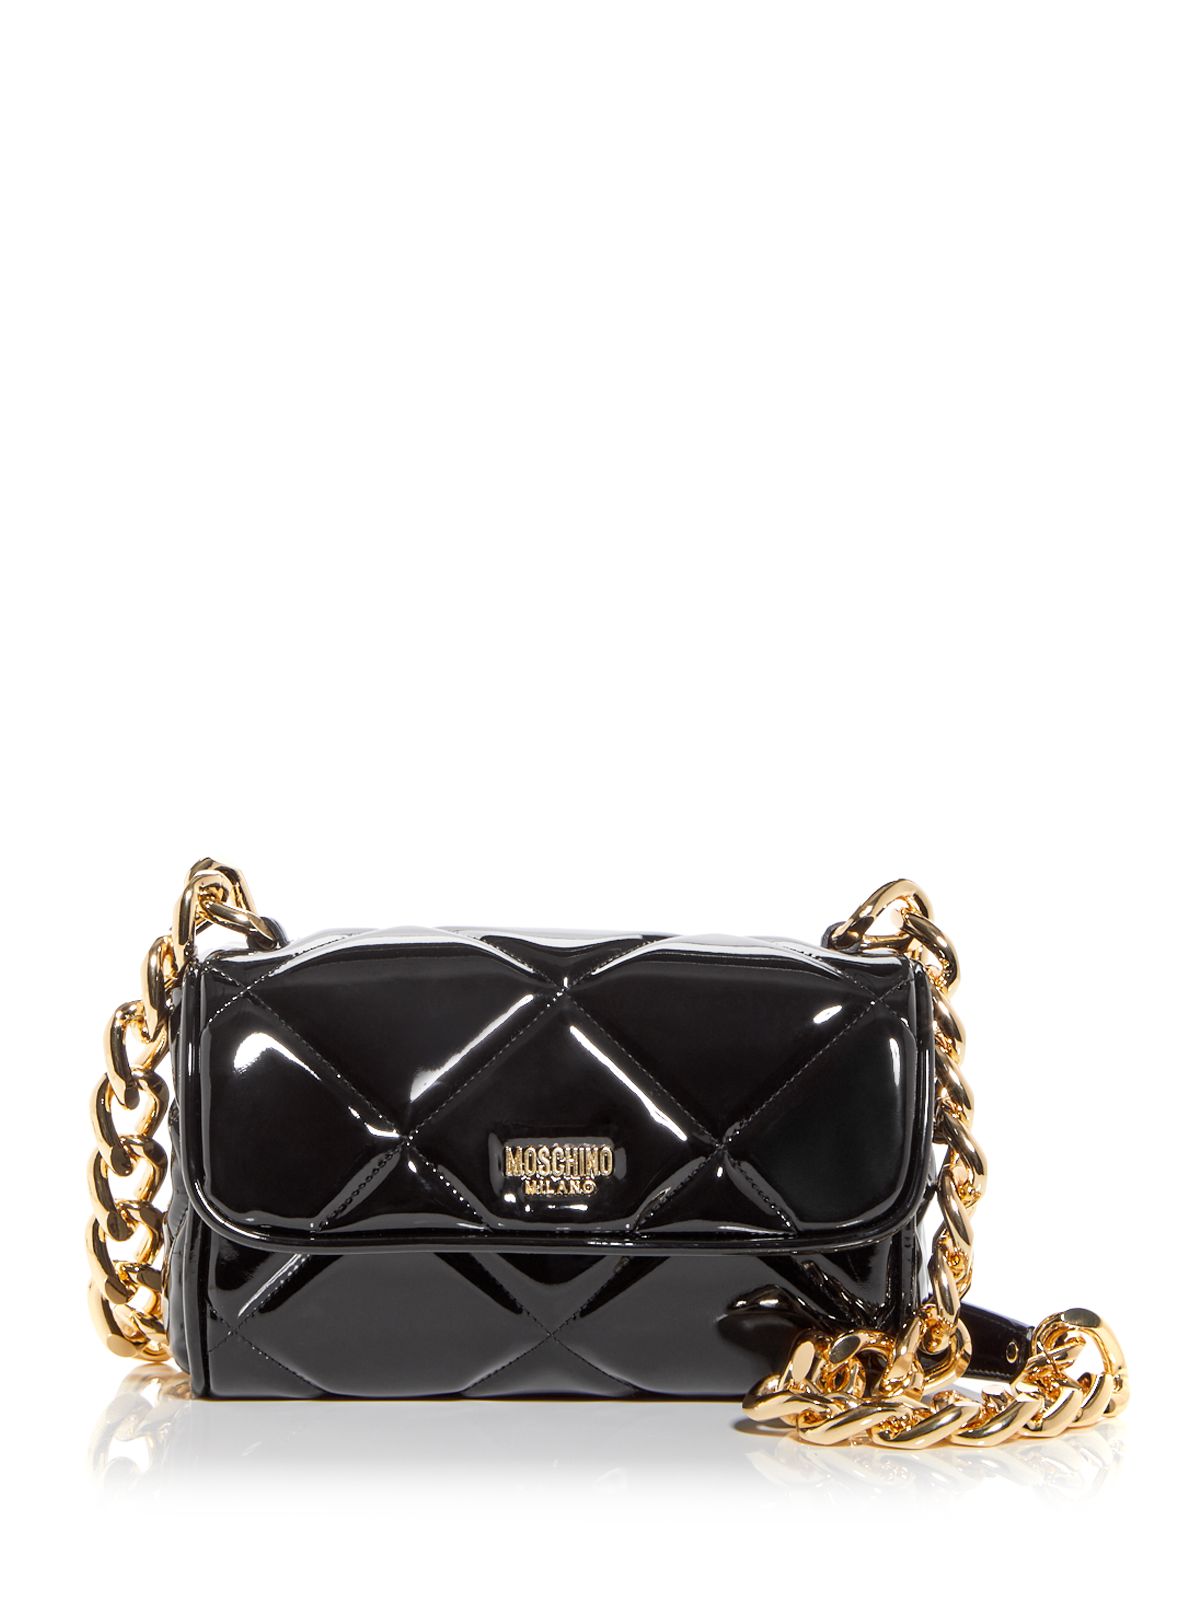 MOSCHINO Women's Black Solid Chunky Quilted Chain Strap Shoulder Bag